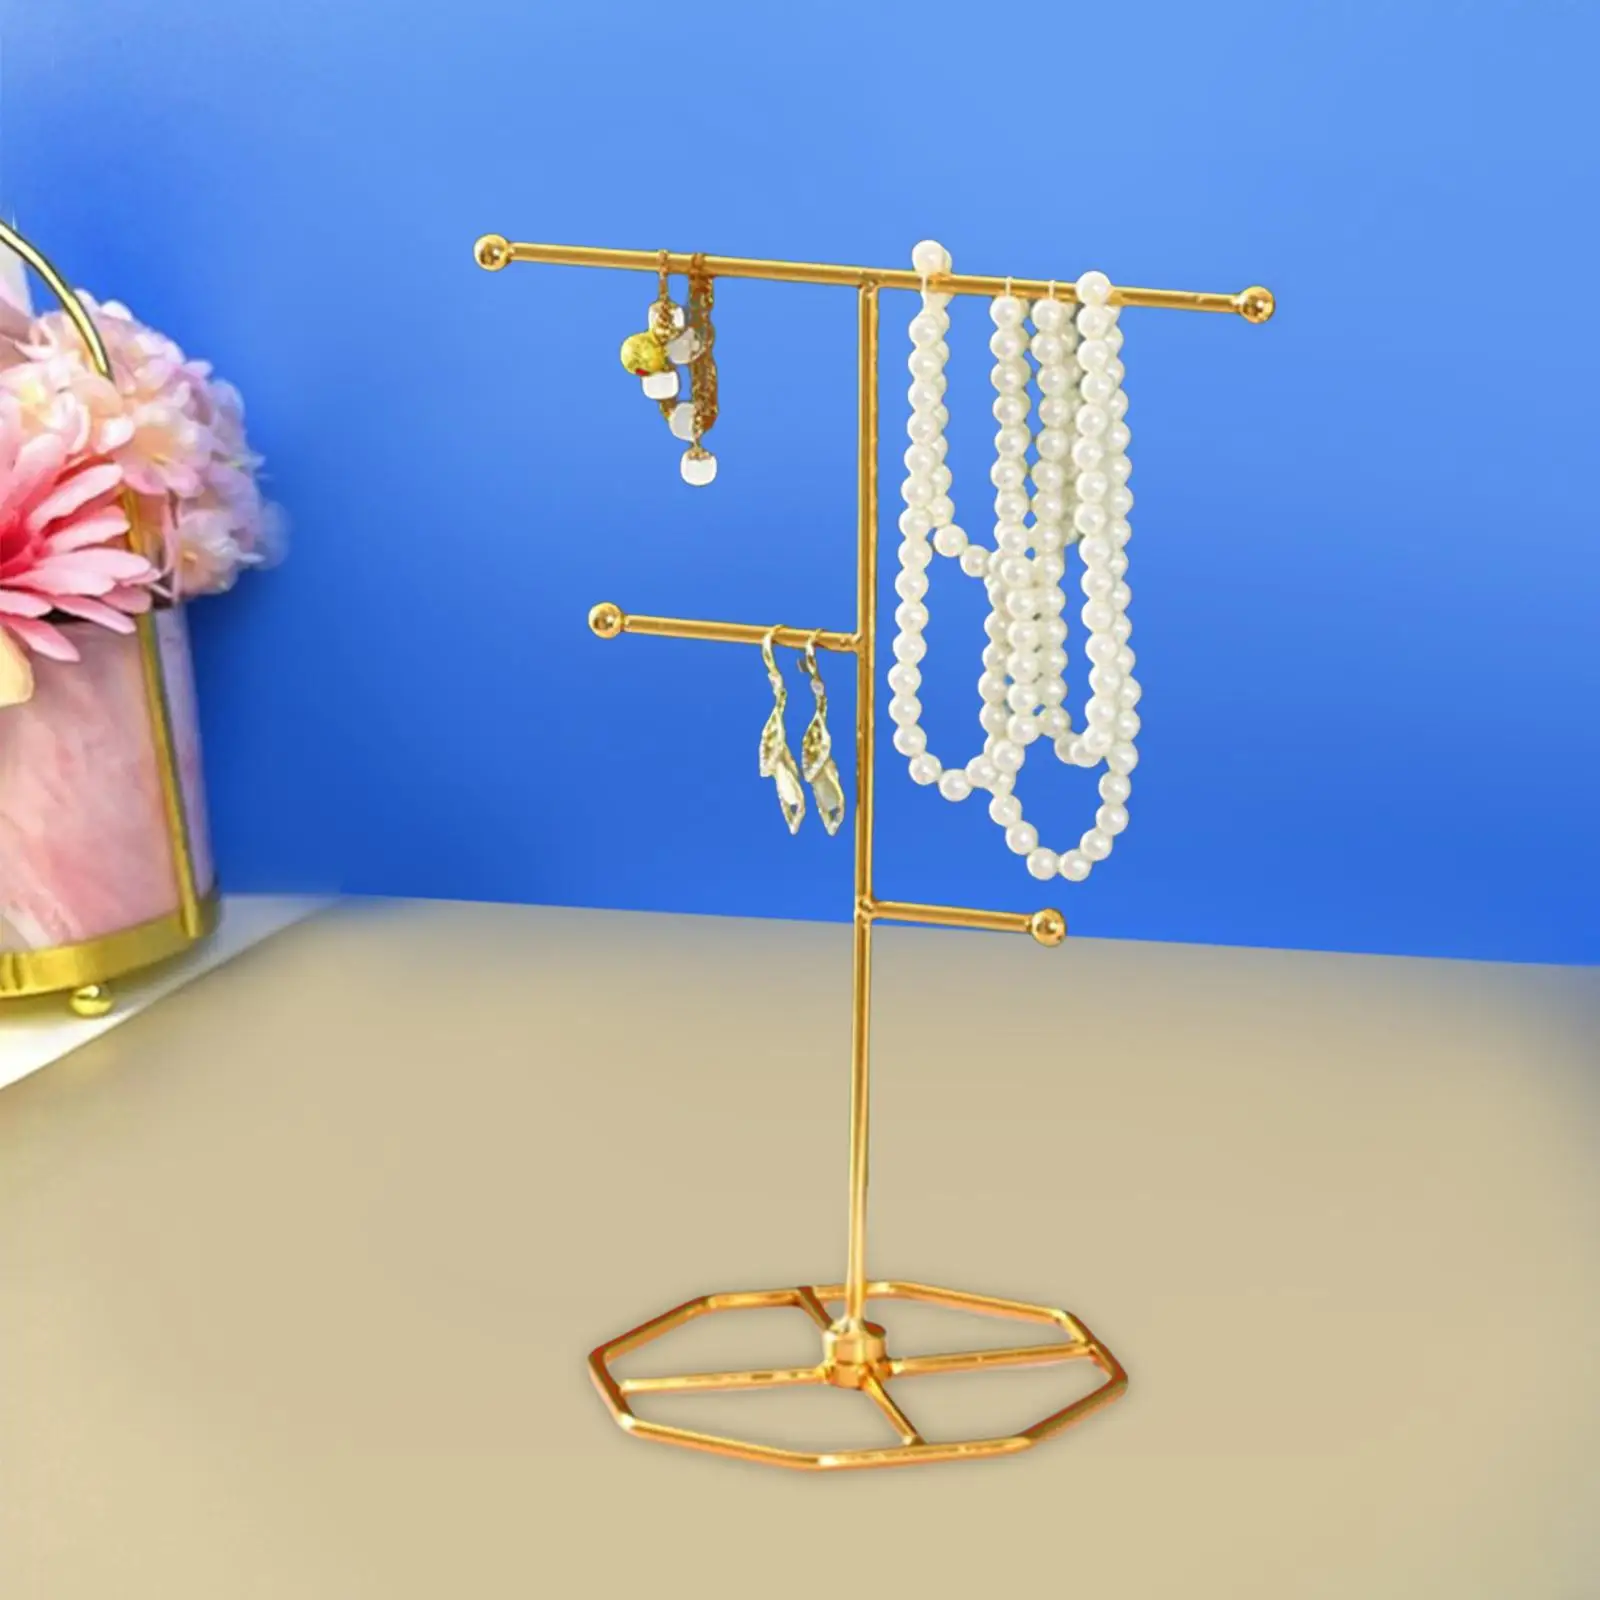 Metal Jewelry Organizer Free Standing Hanger Home Decors Ornament Earring Display Stand for Chains Bracelet Vanity Table Closet